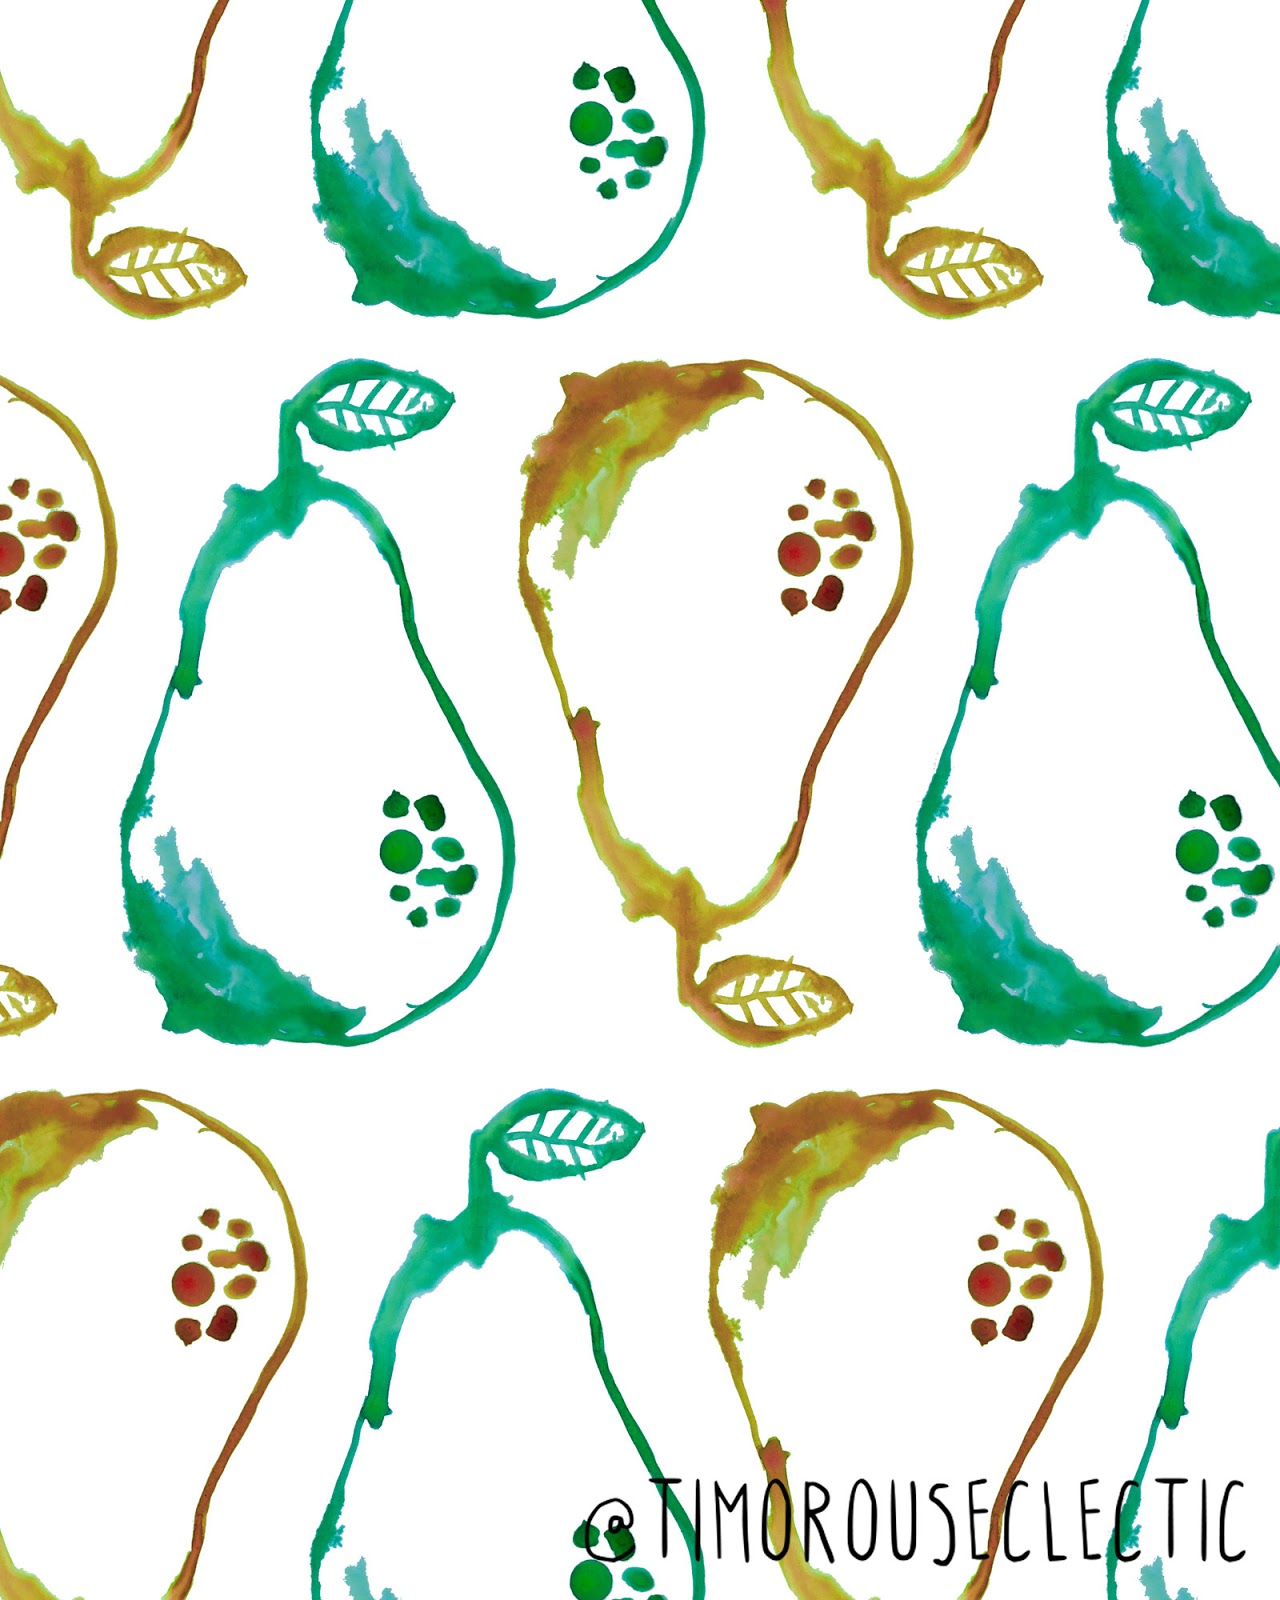 hand painted ink pears in a repeating pattern